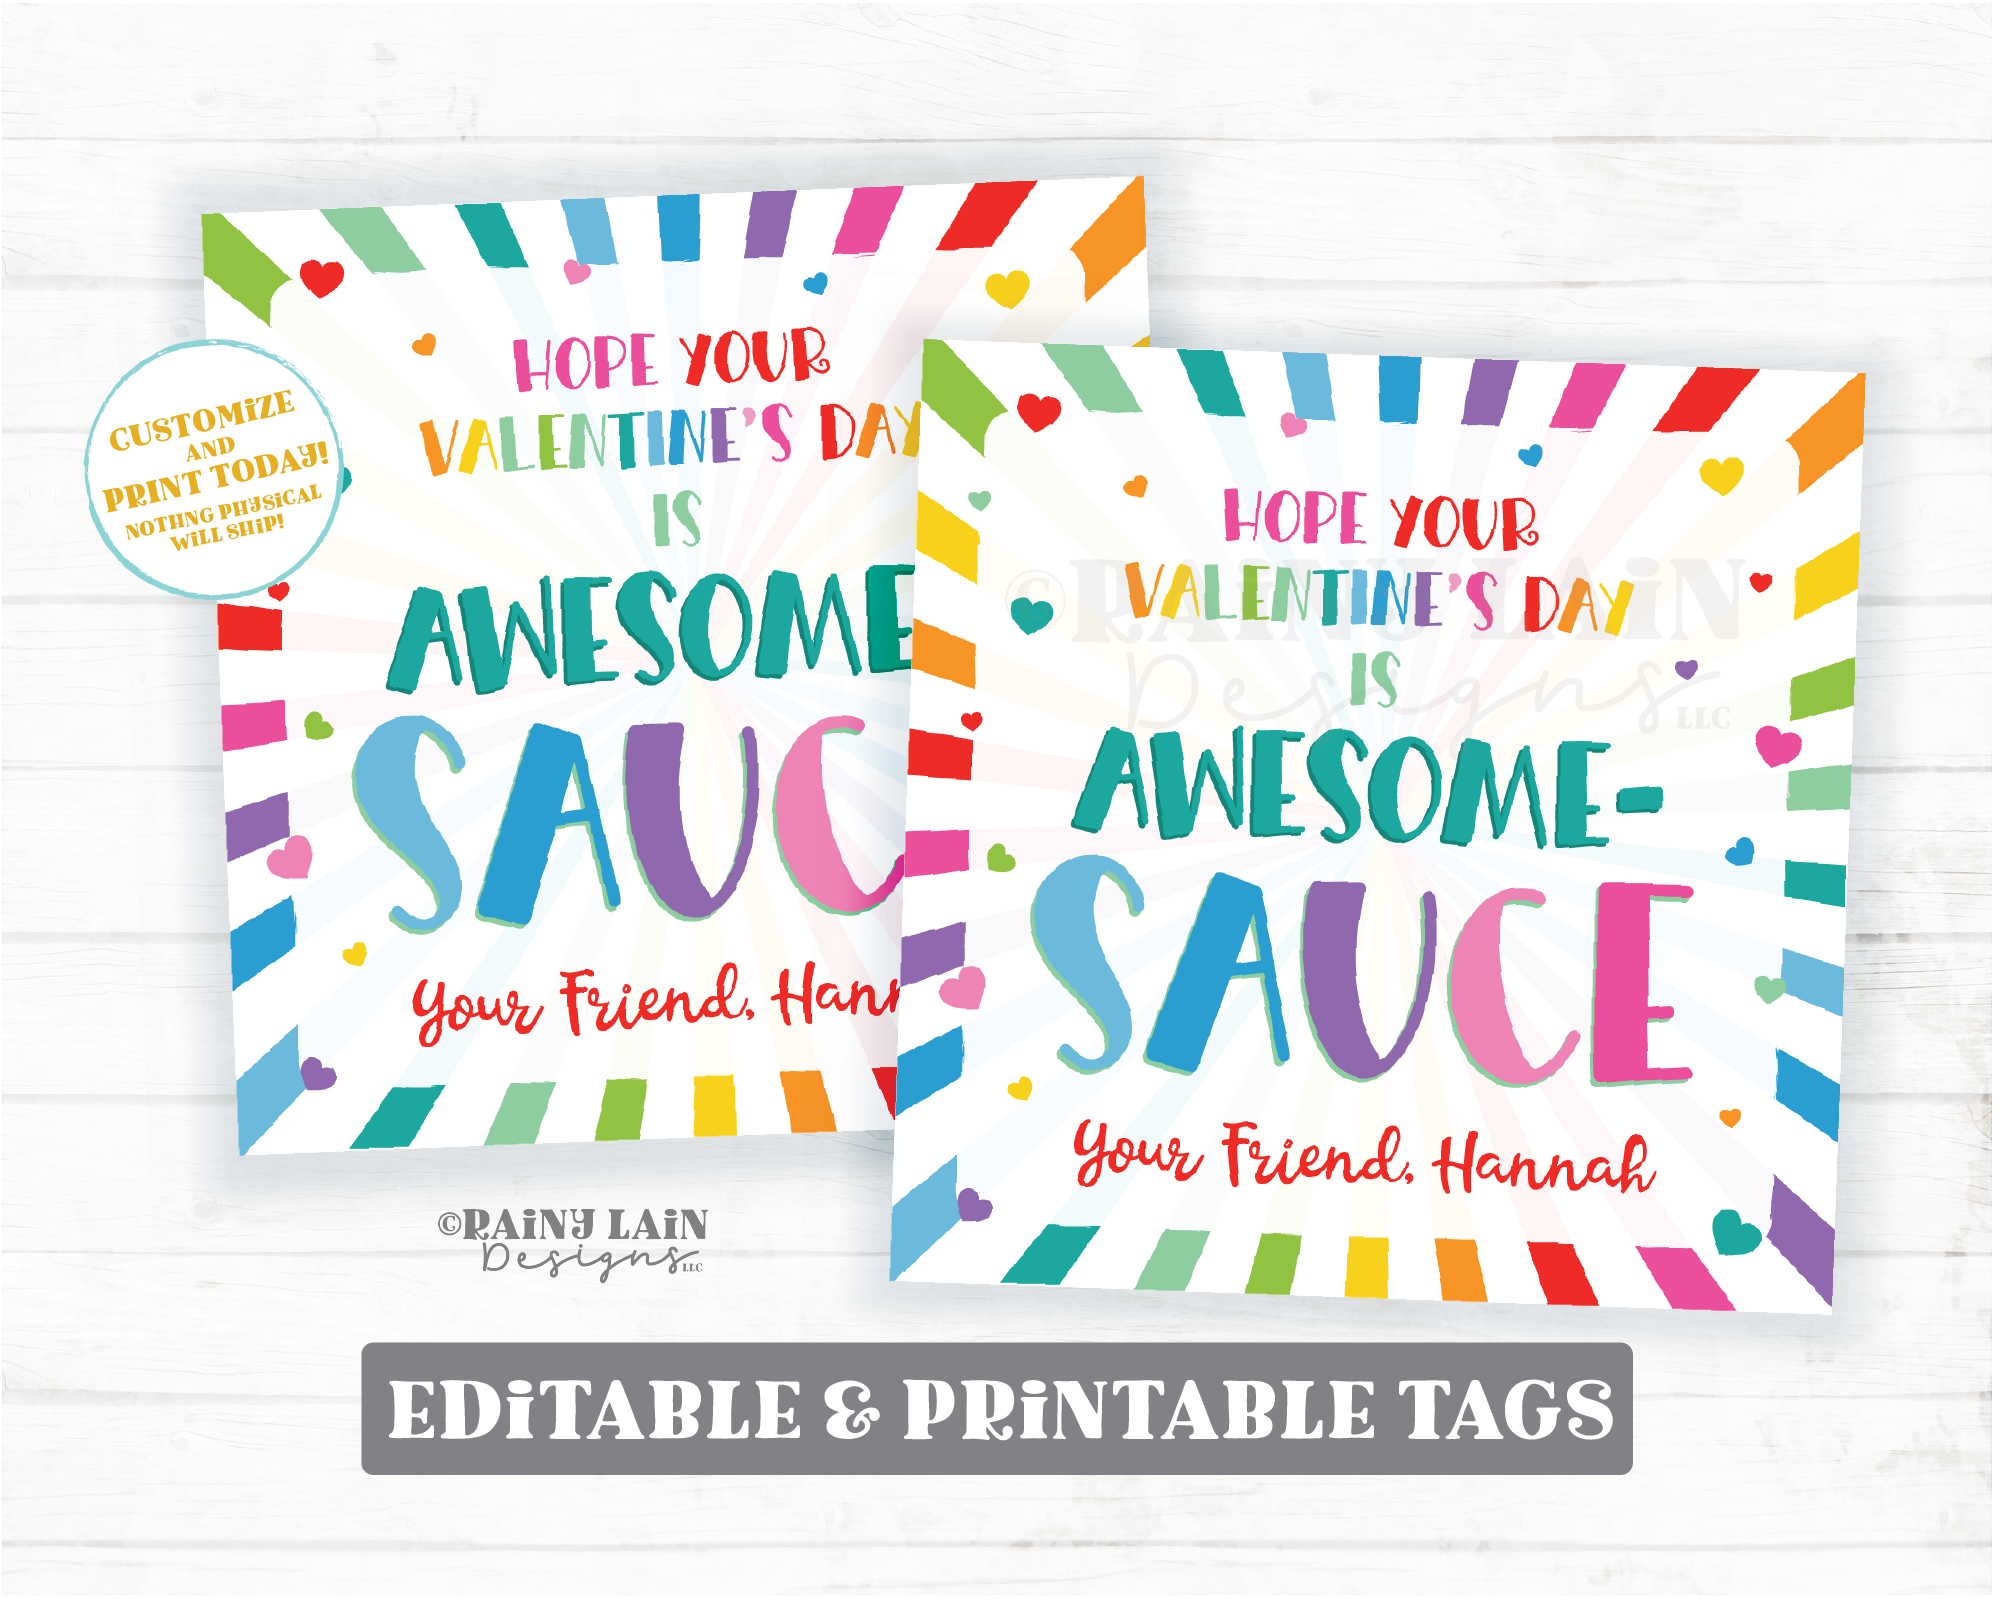 Awesome Sauce Tag Applesauce Valentine Apple Sauce Preschool Classroom Hot Friend Co-Worker Printable Editable Easy Kids Non-Candy Valentine